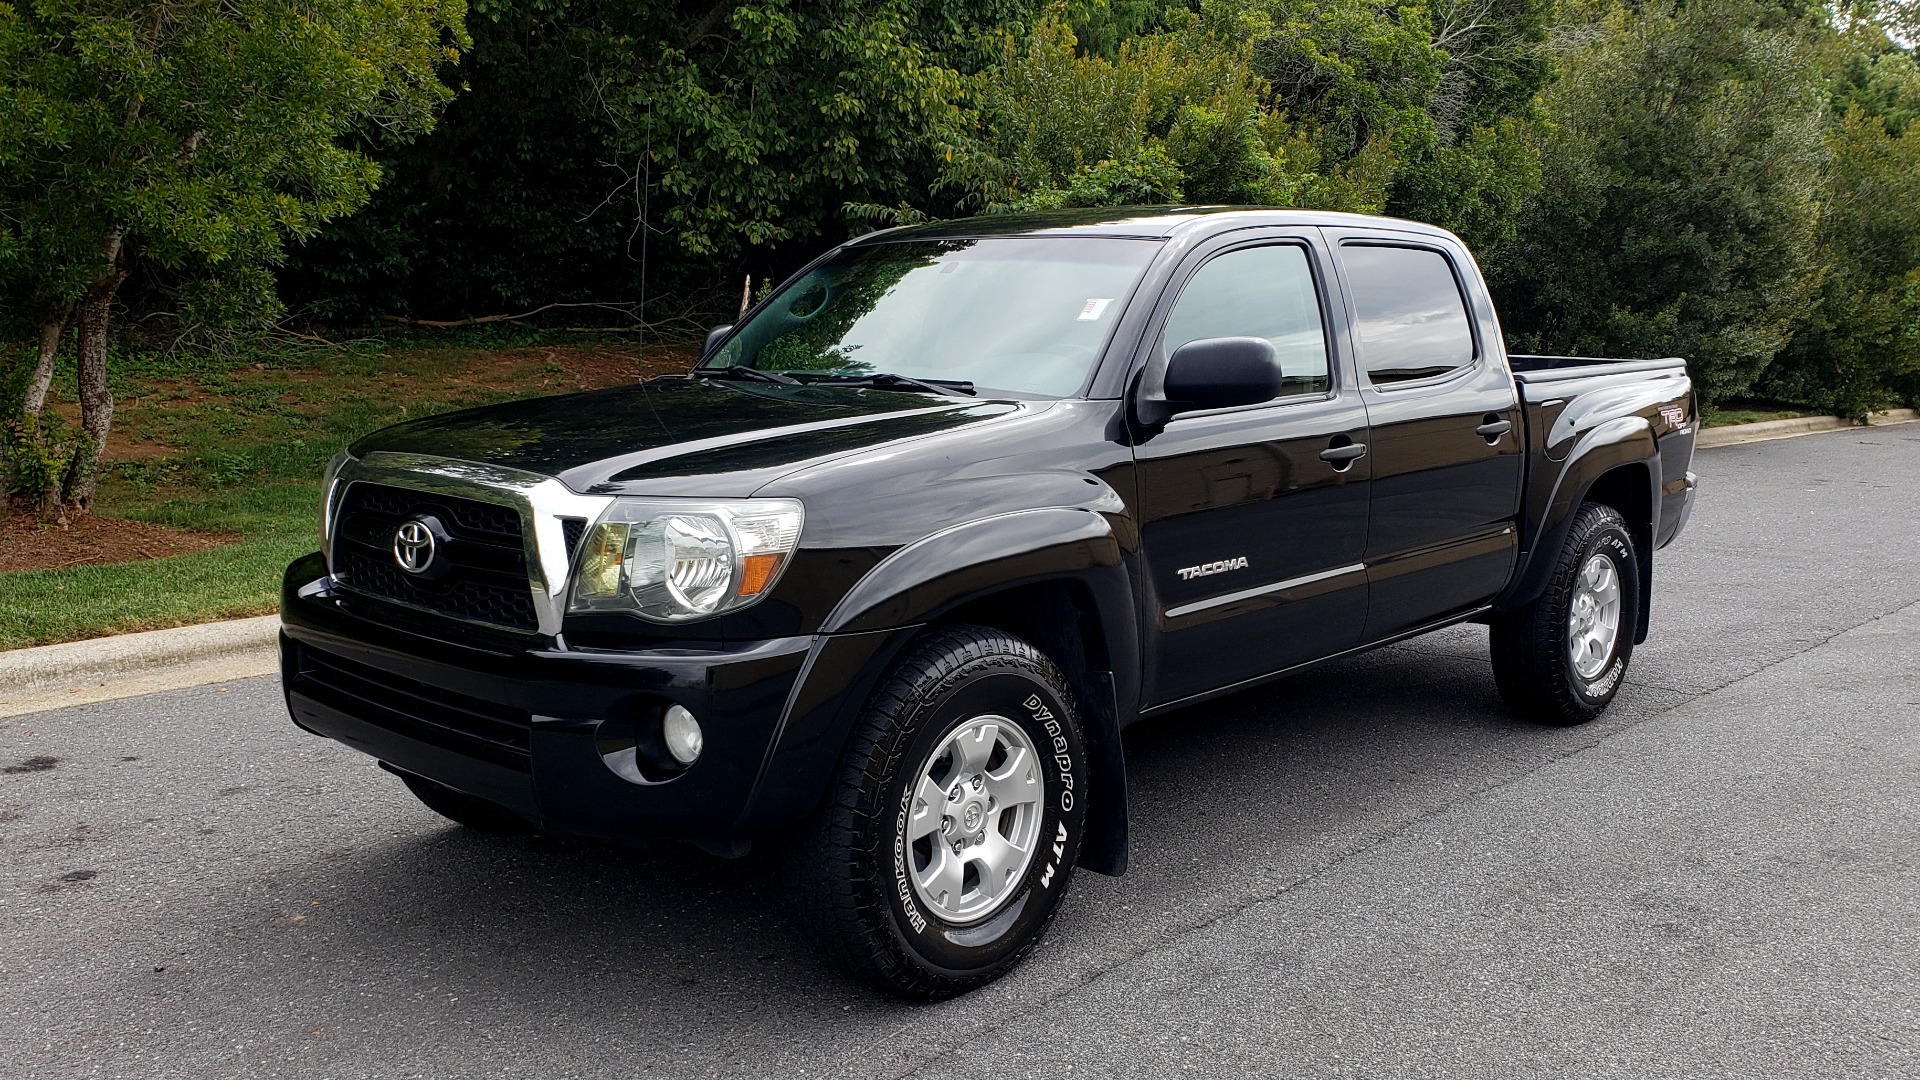 Used 2011 Toyota TACOMA 4WD / 4.0L V6 / 5-SPD AUTO / TRD OFF-ROAD PKG / BED LINER for sale Sold at Formula Imports in Charlotte NC 28227 1